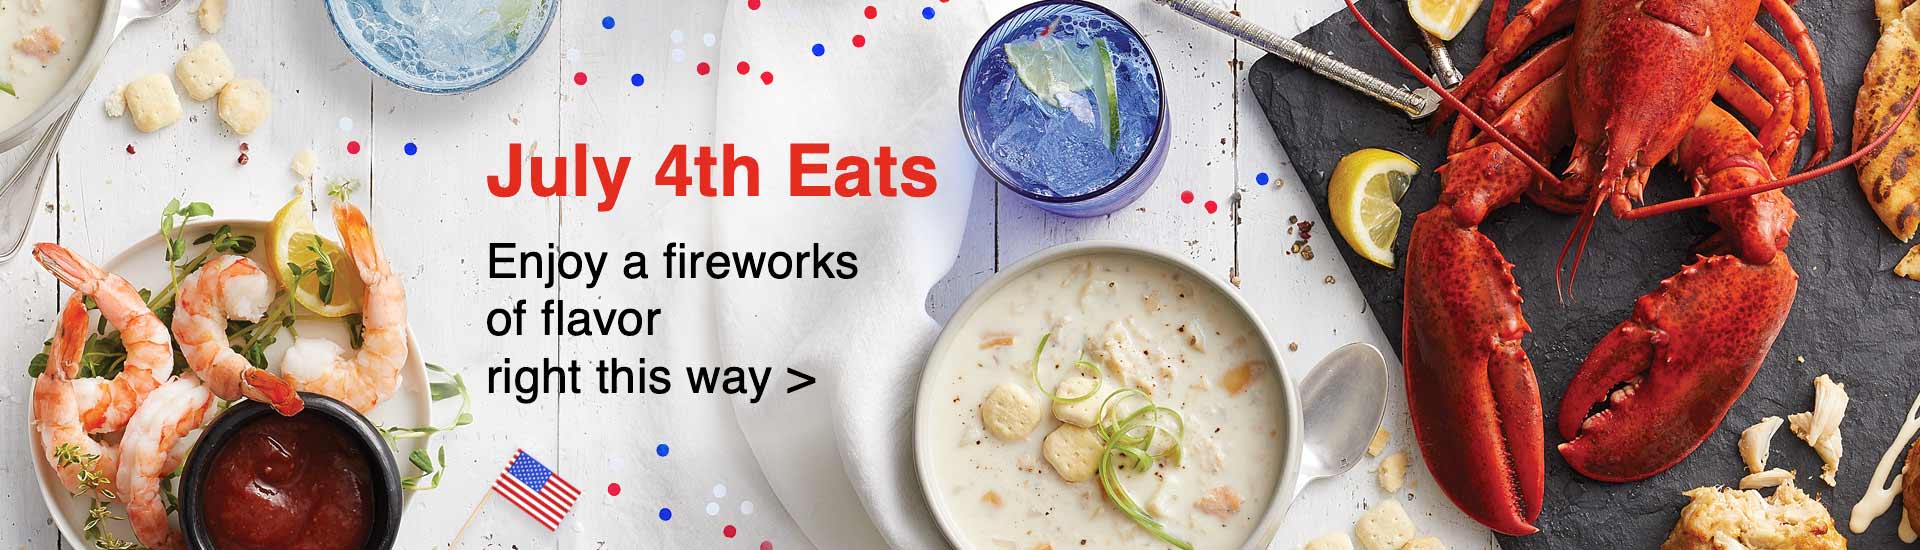 July 4th Eats: Get a fireworks of flavor right this way